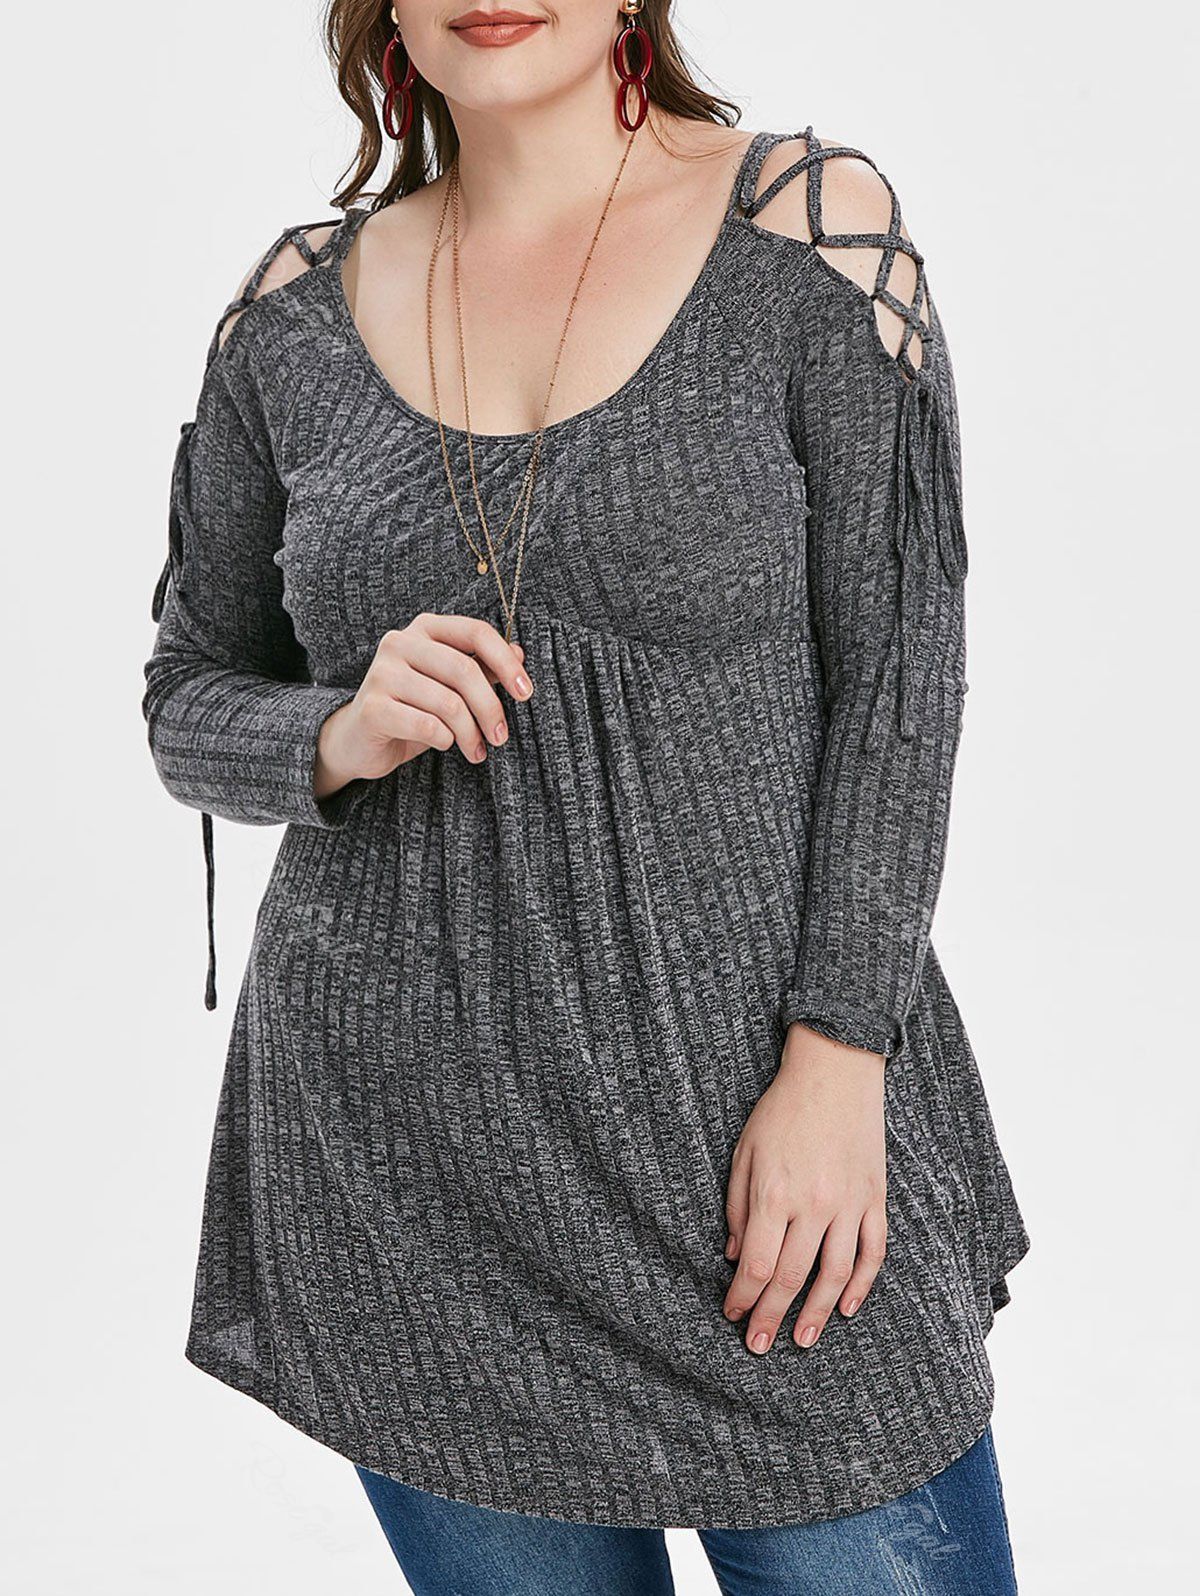 Discount Plus Size Heathered Lace Up Tunic Knitwear  